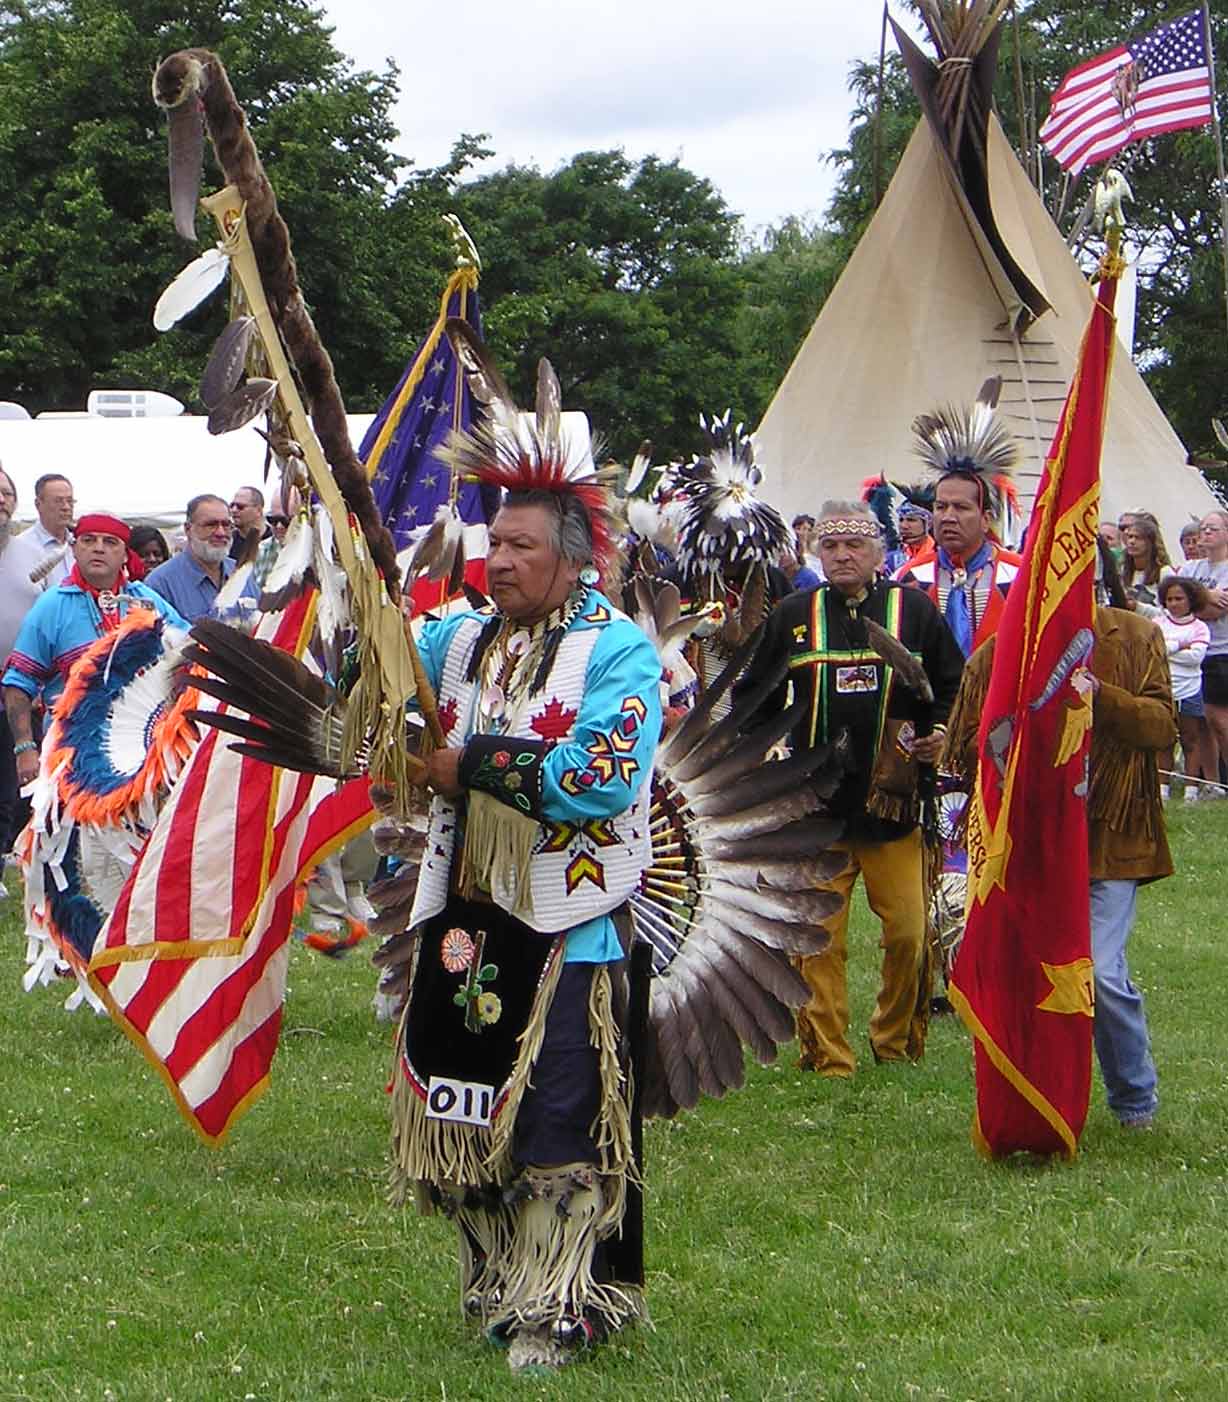 Grand Entrey at the Cleveland powwow